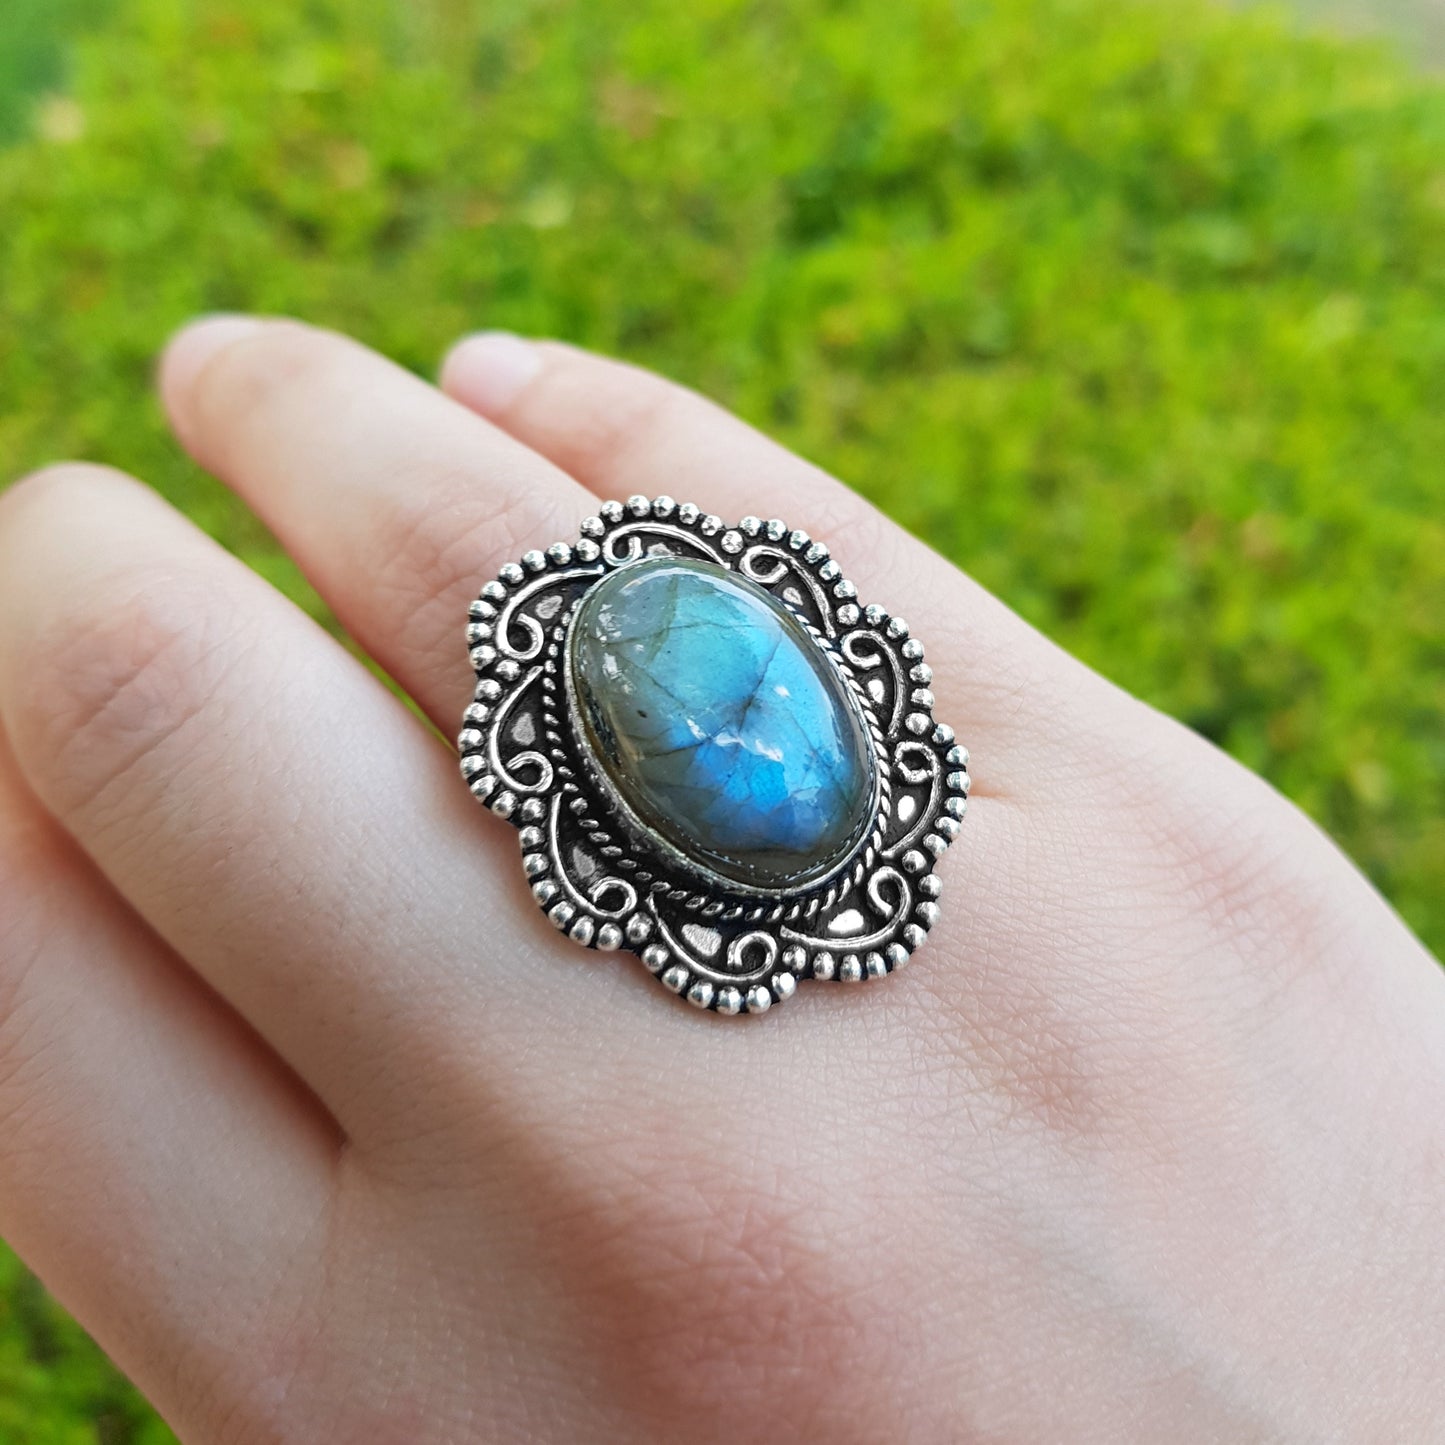 Labradorite Gemstone Ring In Sterling Silver Size US 8 1/2, Statement Ring, Crystal Ring, Boho Rings, Gypsy Jewelry Unique Gift